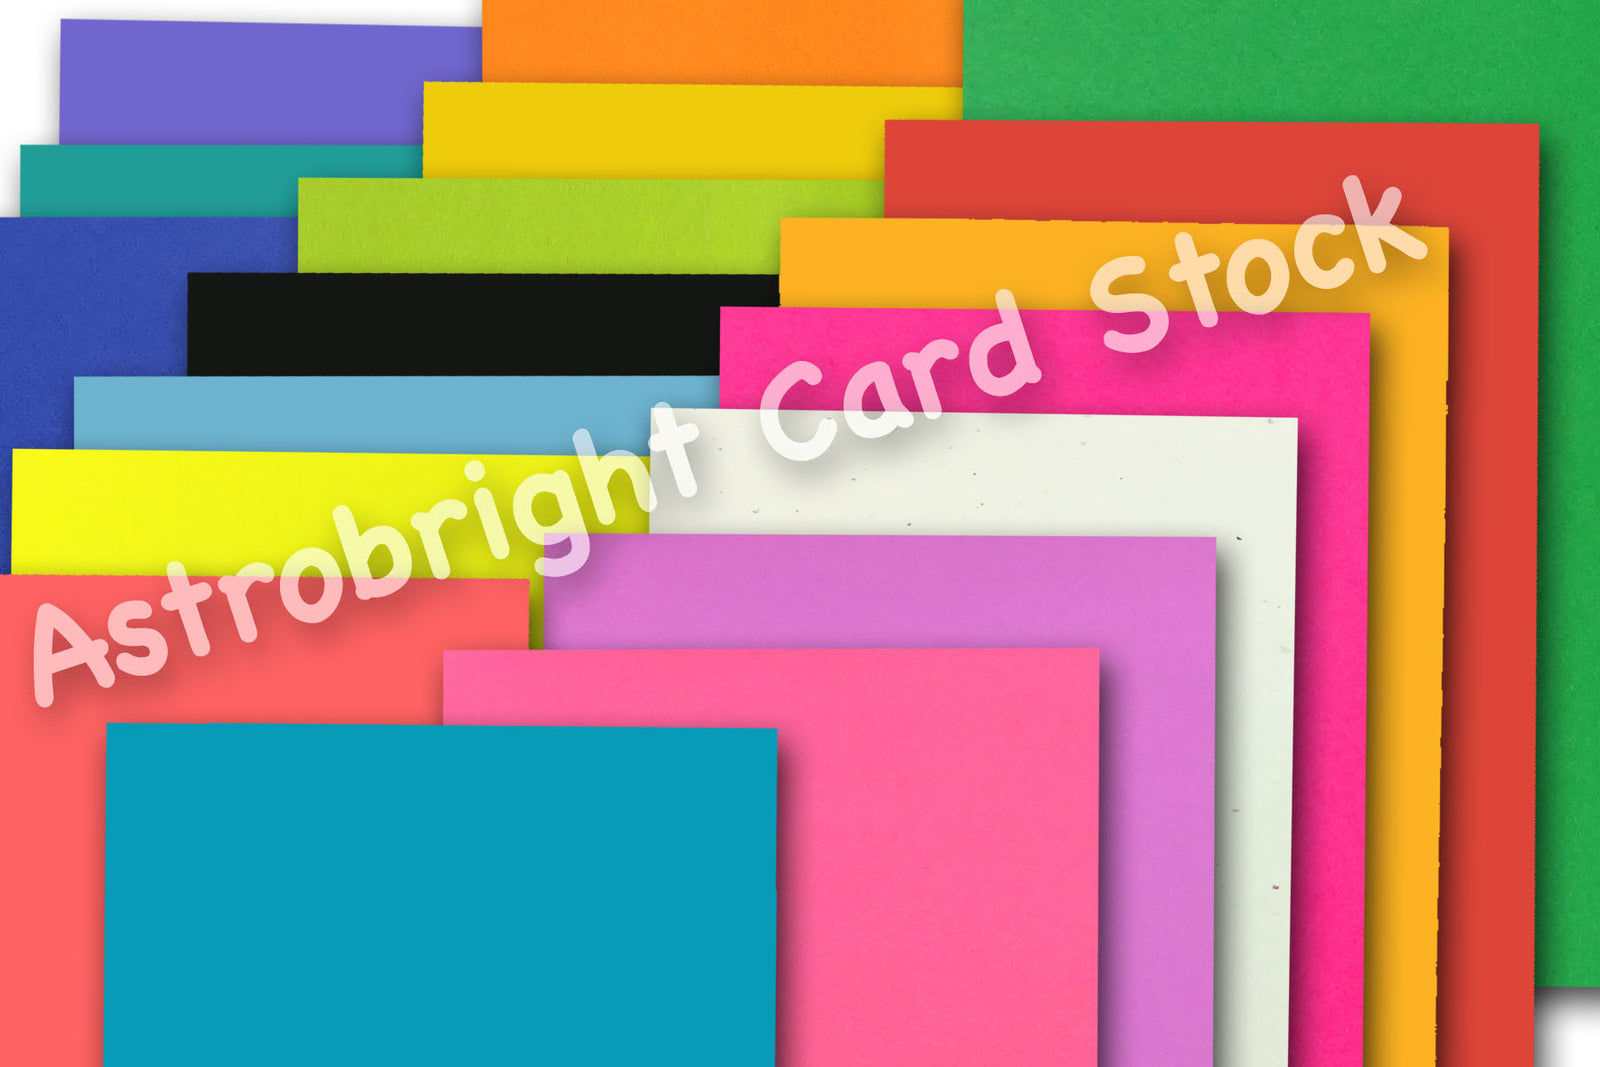 Astrobright Lift Off Lemon Yellow Card Stock for get noticed flyers -  CutCardStock